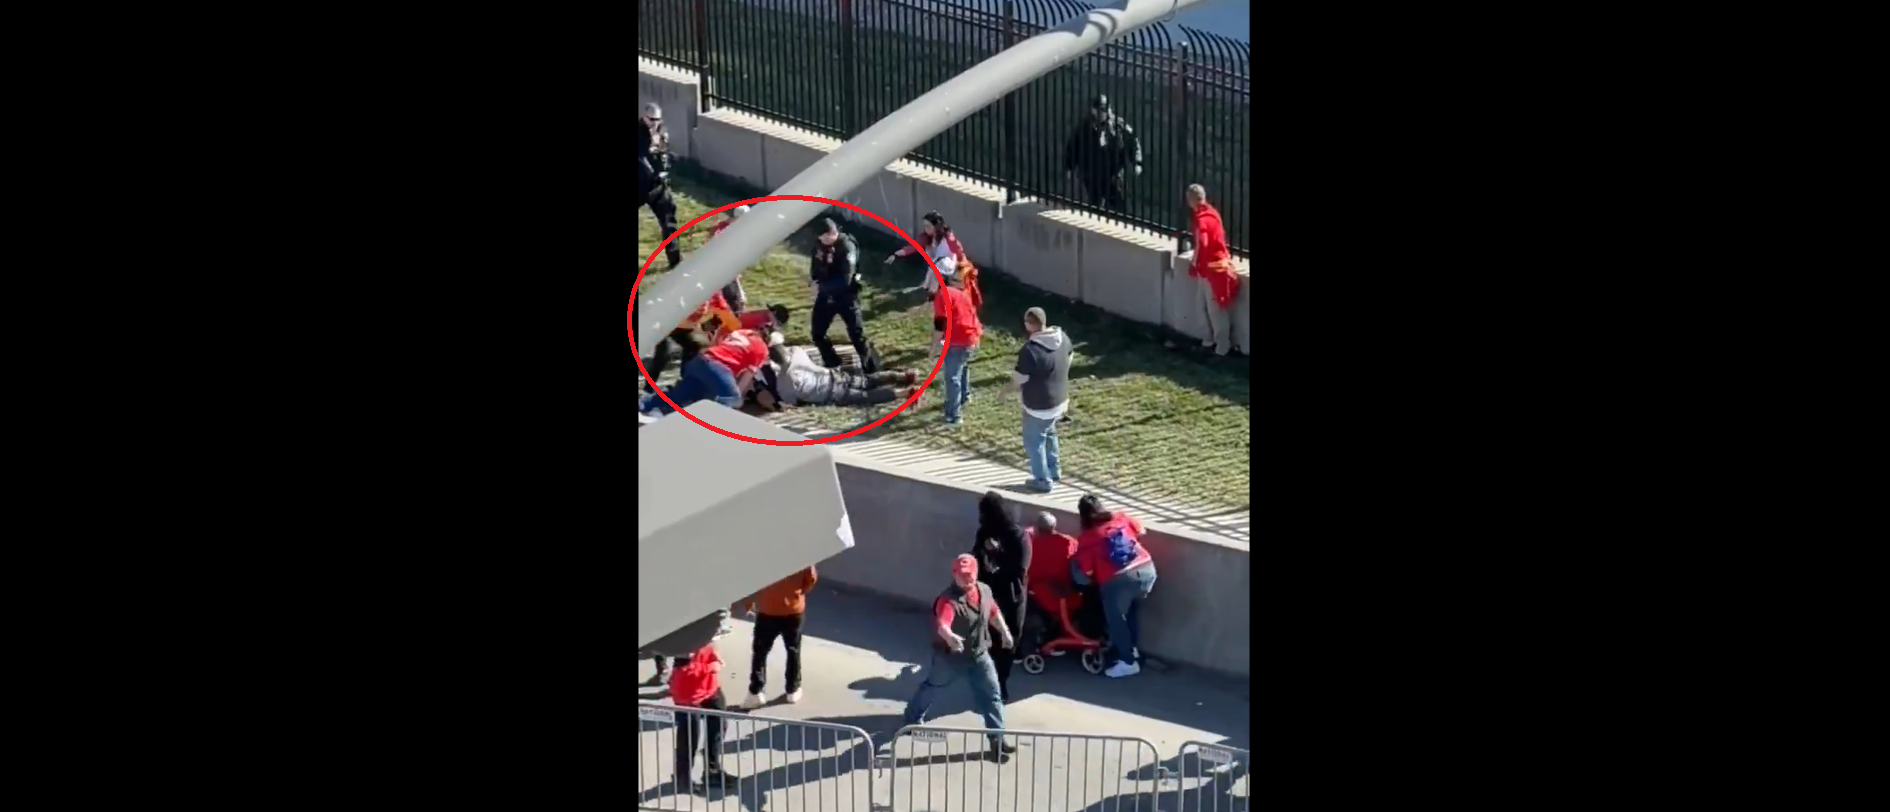 Video Appears To Show Heroic Chiefs Fans Tackling Suspected Kansas City Shooter